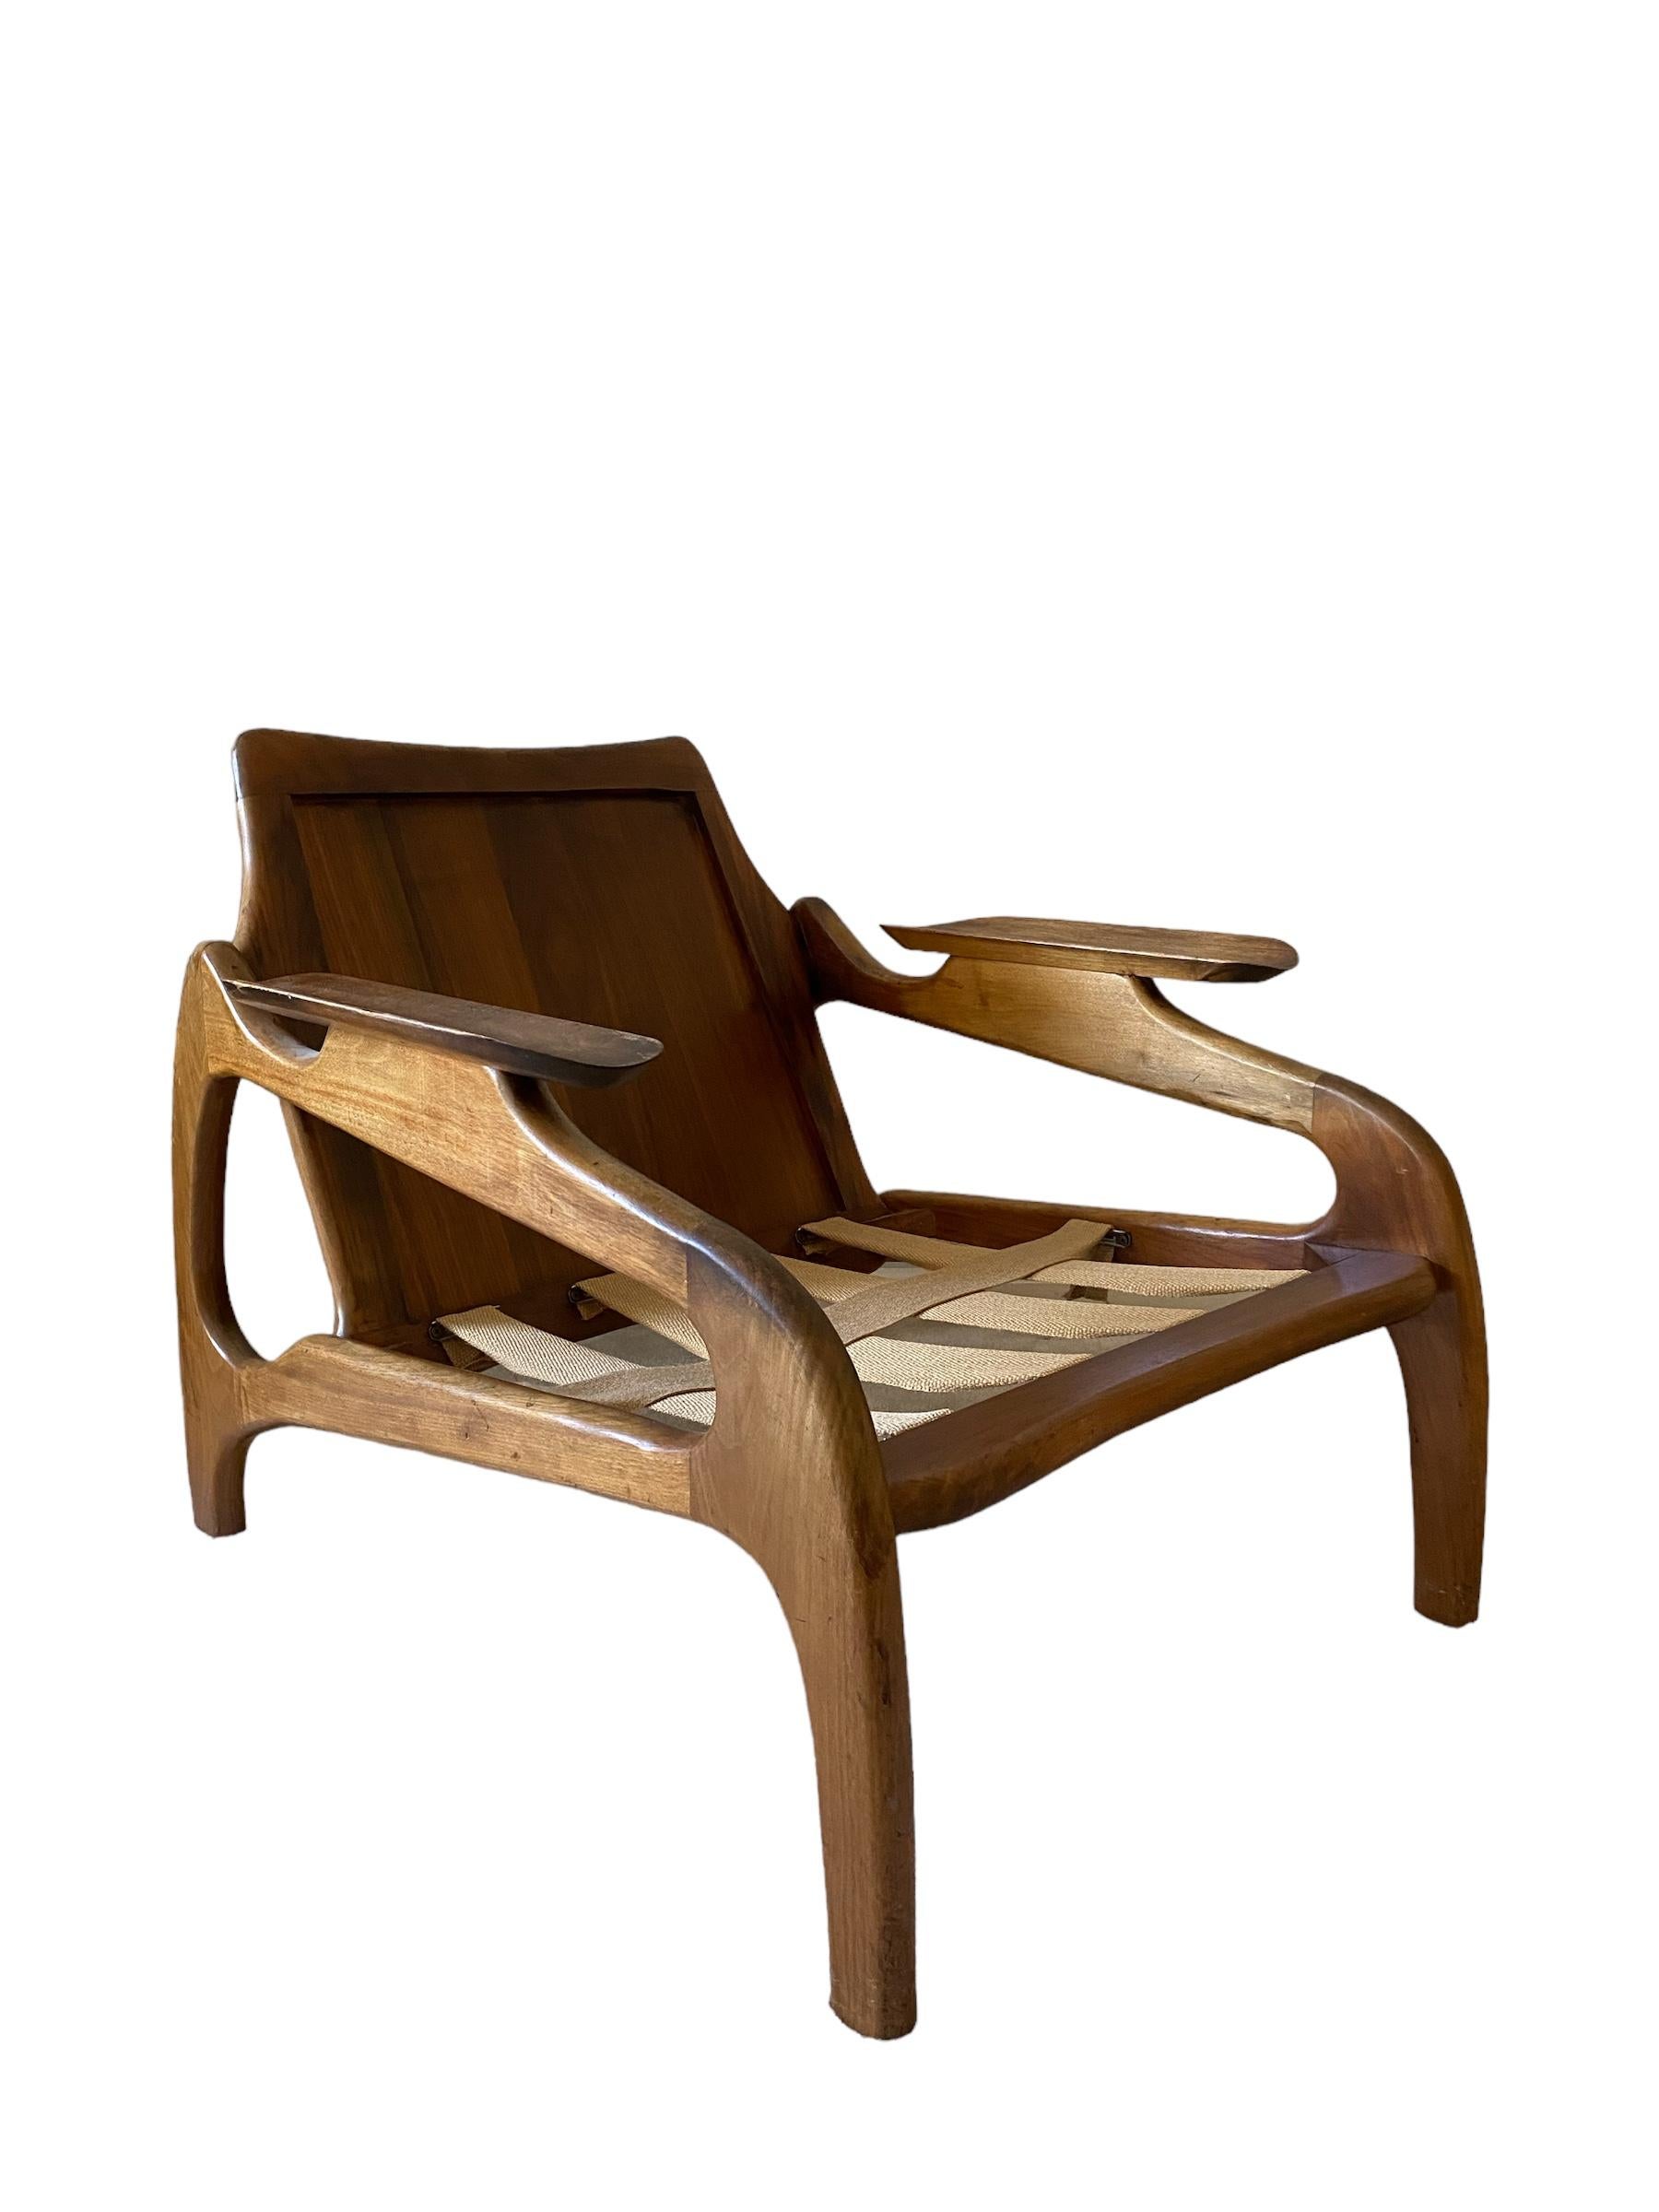 Model 1209-C for Craft Associates.   A beautiful sleeping walnut chair, with the most beautiful low proportions. Extremely comfortable, and beautiful from every angle. 

Walnut frame, solid back panels in walnut, upholstery. Cushions have new foam